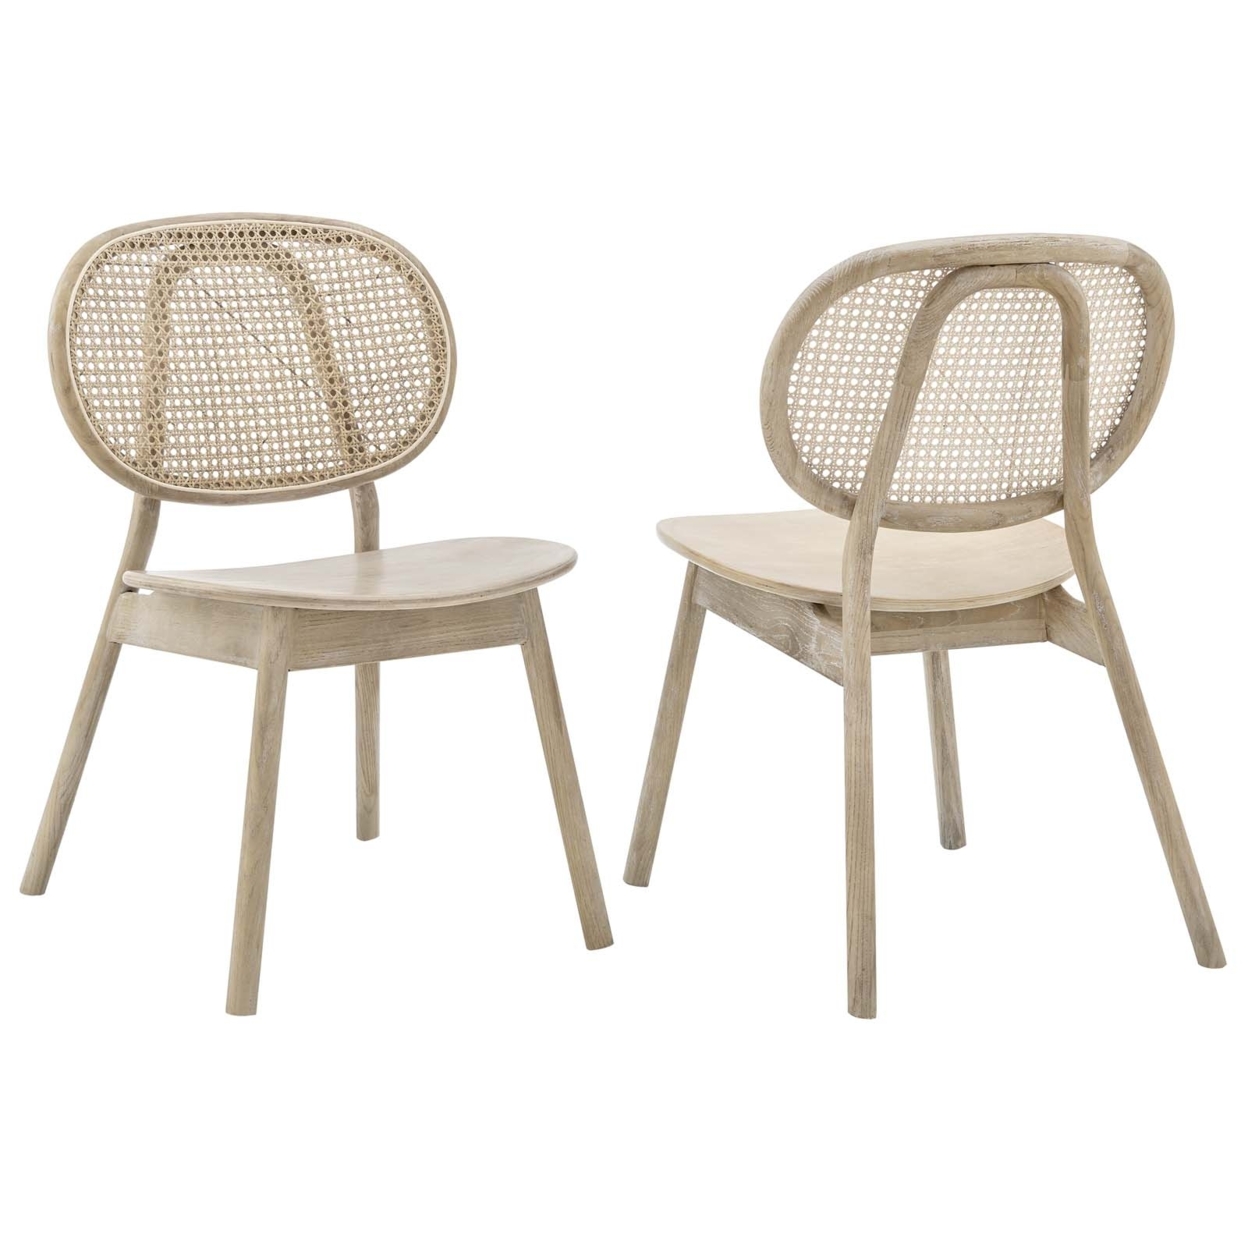 Malina Wood Dining Side Chair Set Of 2, Gray